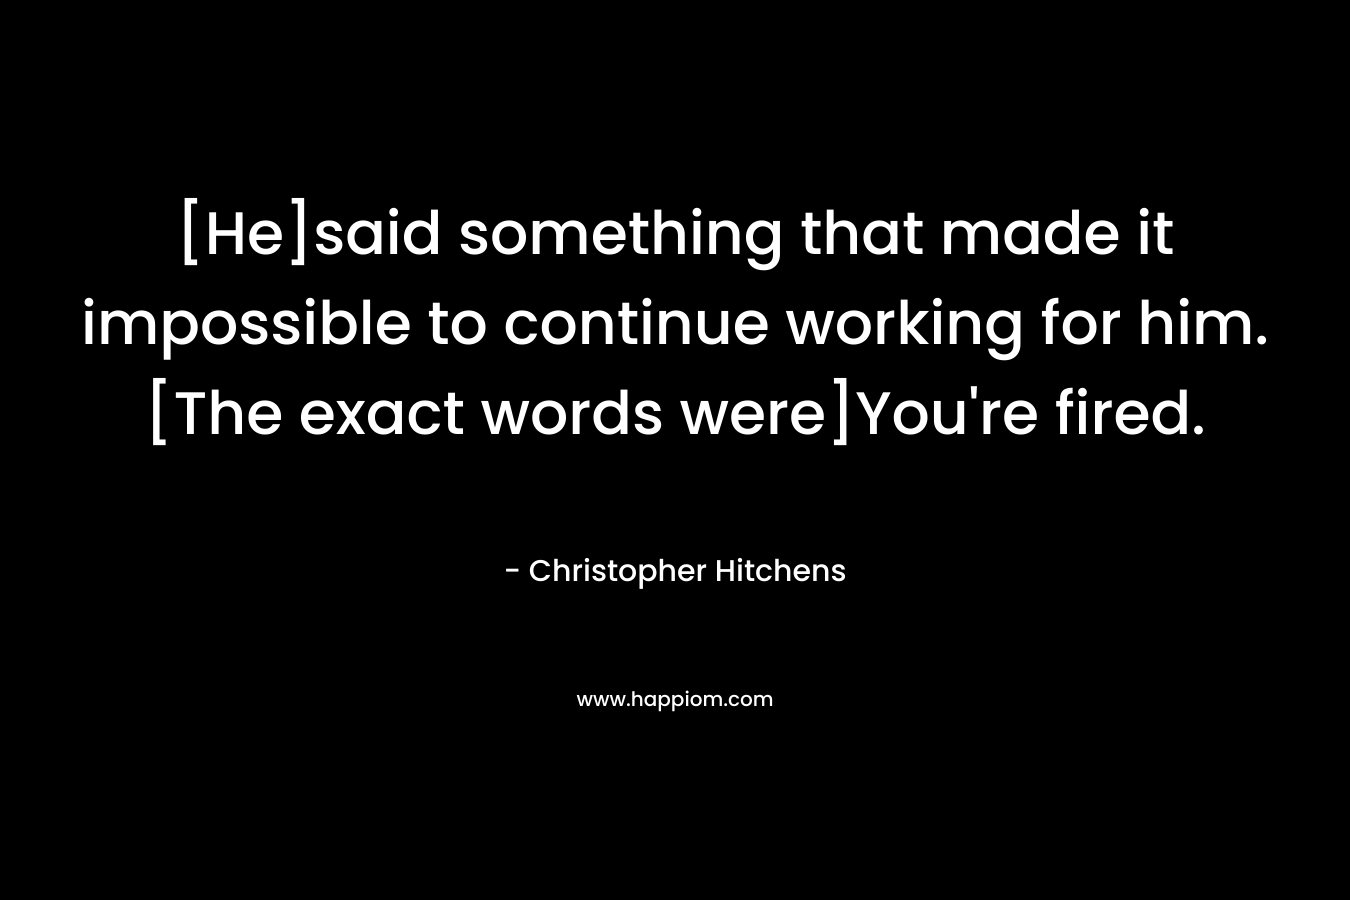 [He]said something that made it impossible to continue working for him.[The exact words were]You're fired.